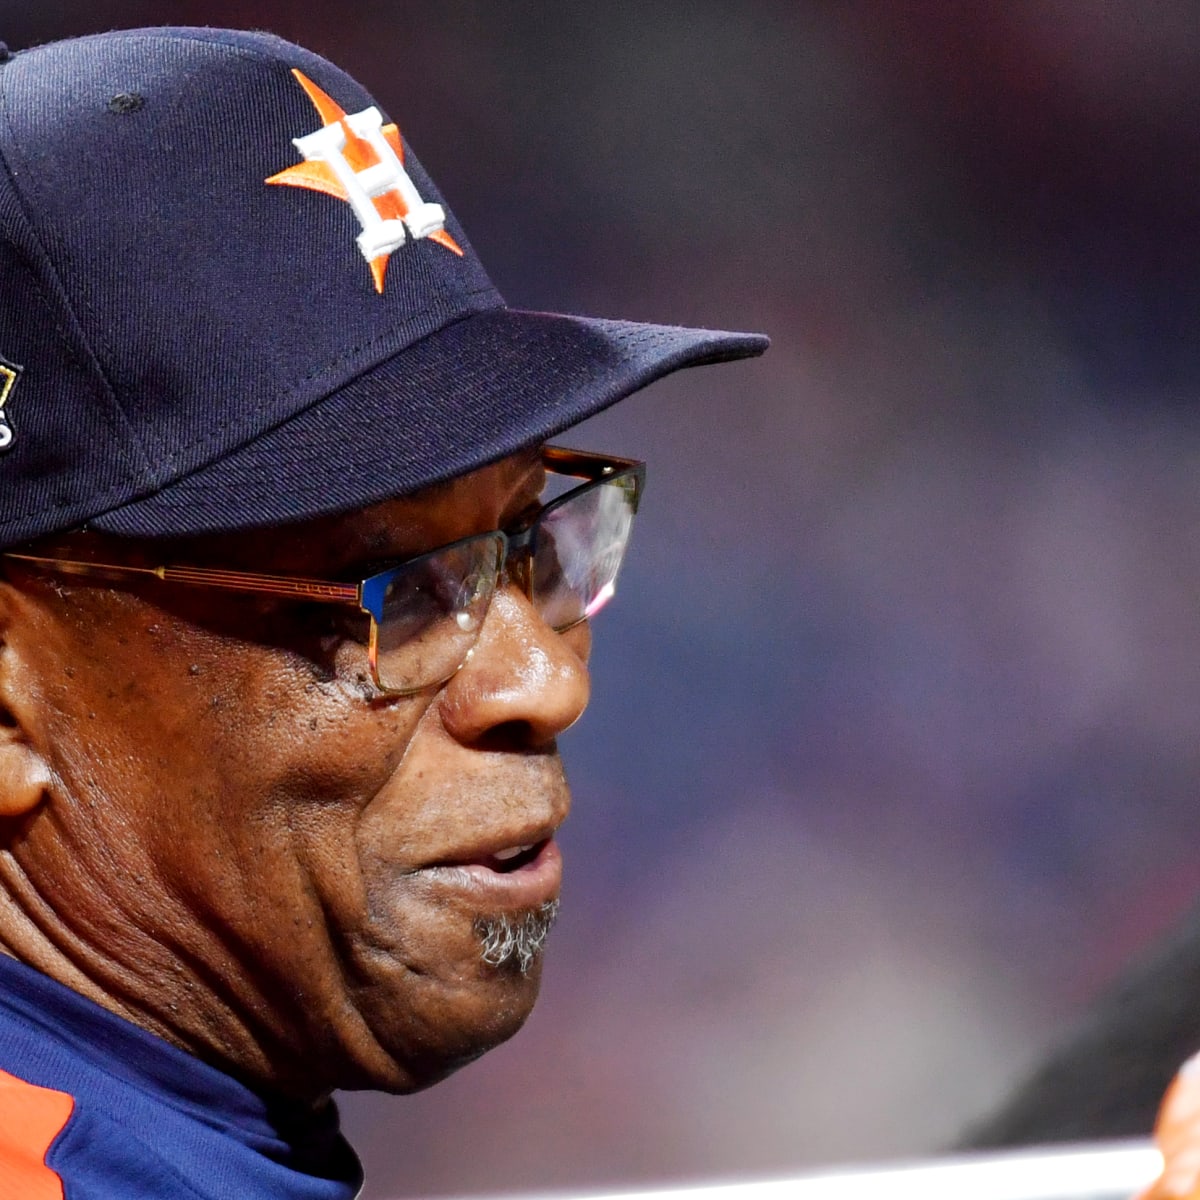 Astros' Dusty Baker represents 'so much for so many' as he looks for his  first World Series win as manager